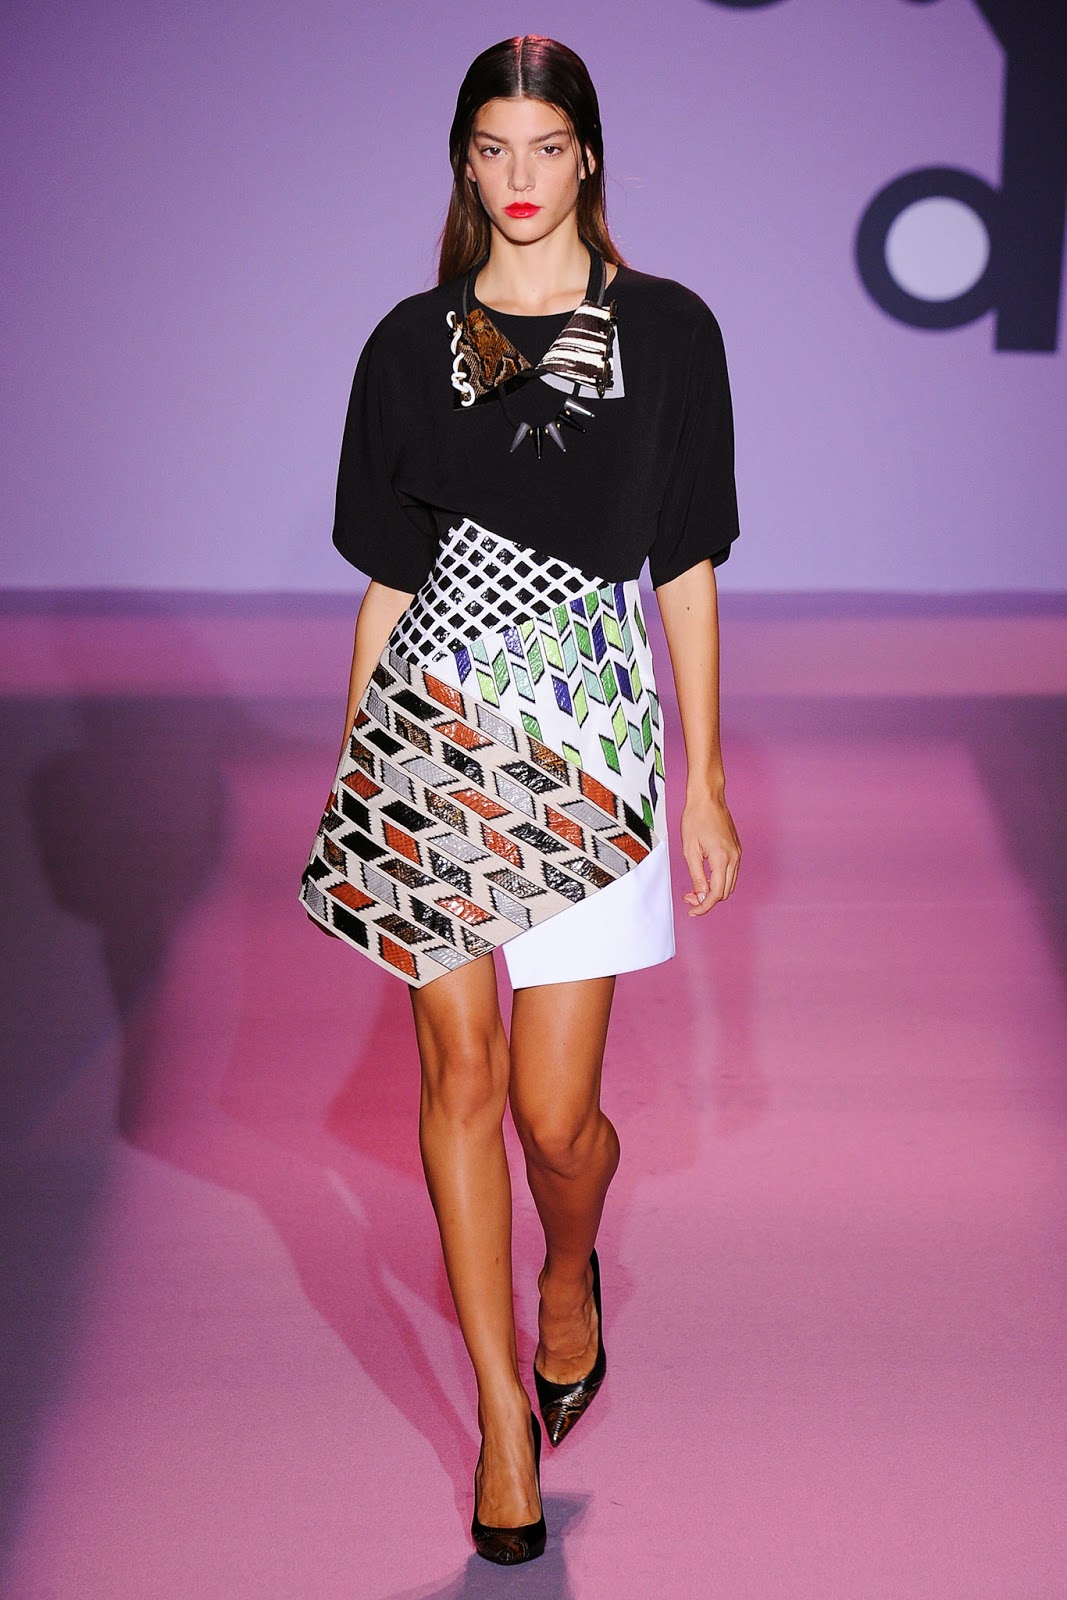 Couture Carrie: Spring 2015 Runway Report: Pretty Patterned Skirts